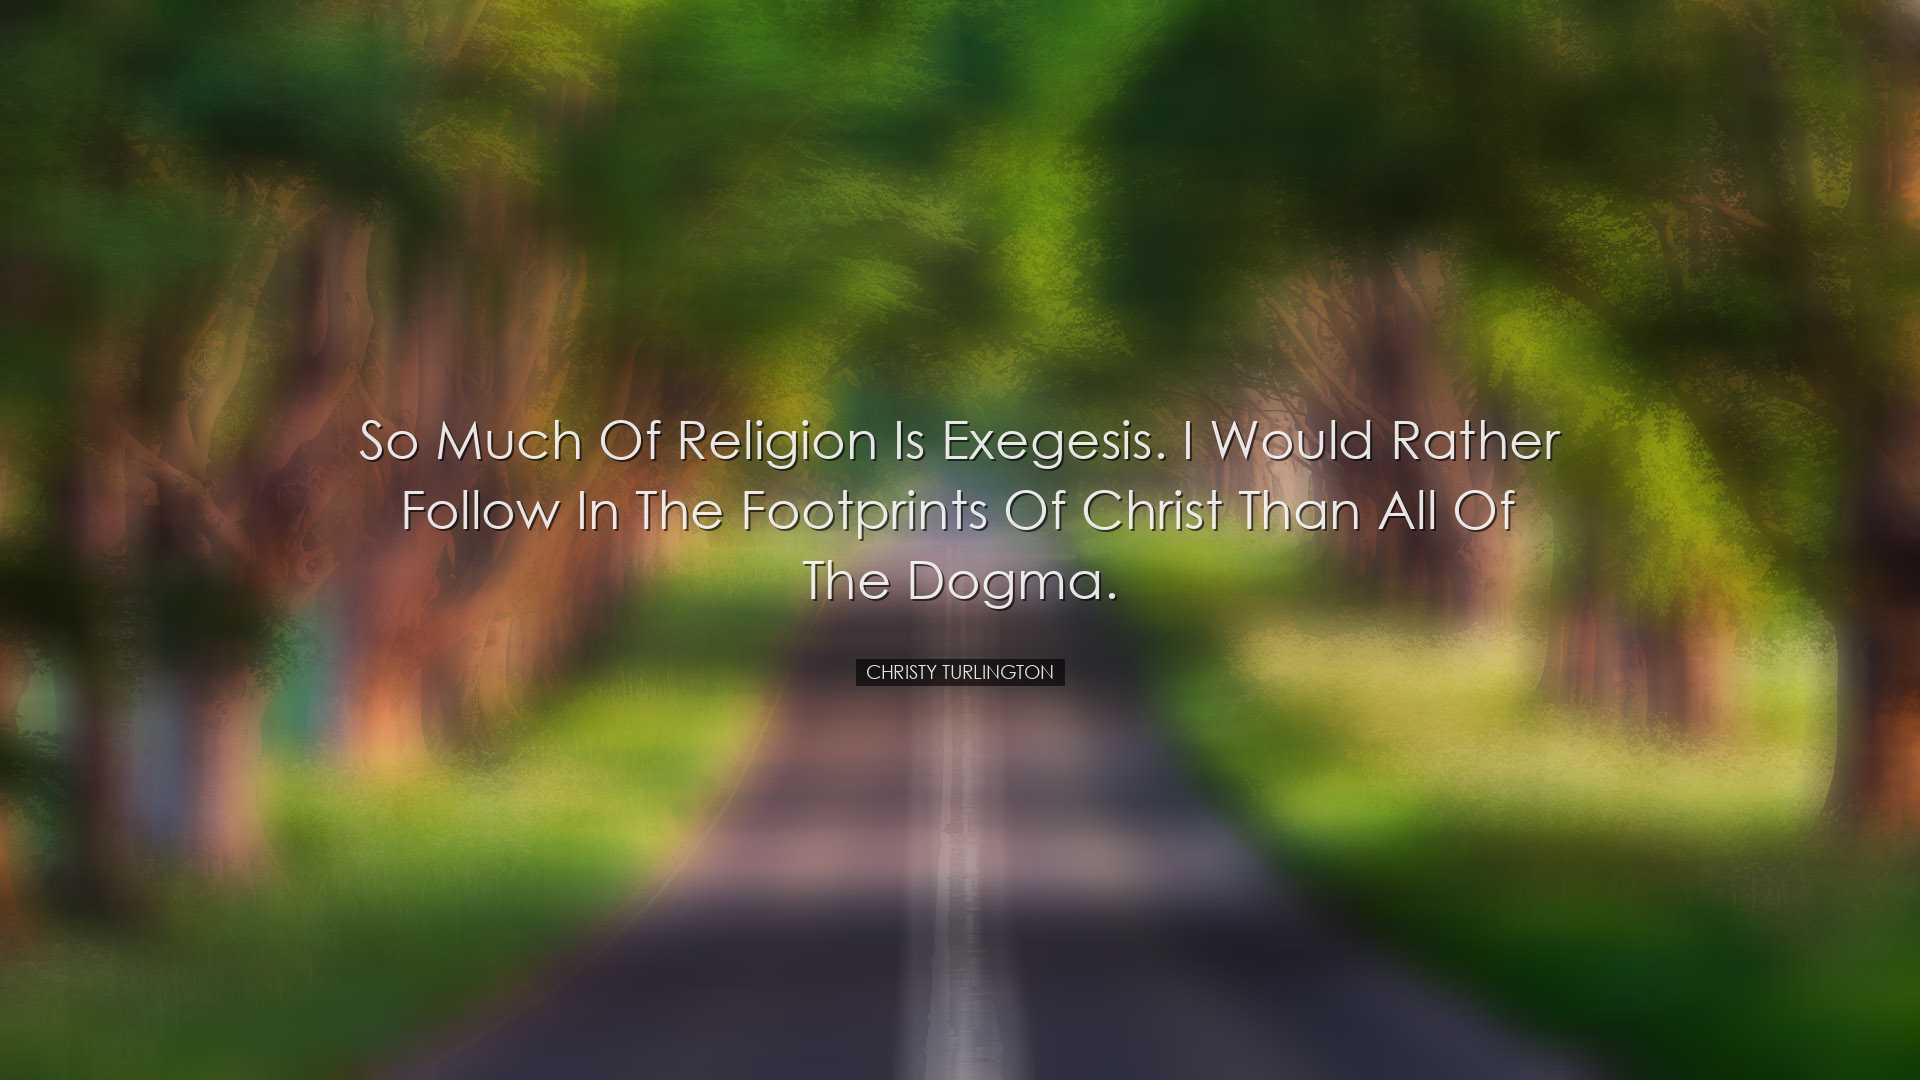 So much of religion is exegesis. I would rather follow in the foot